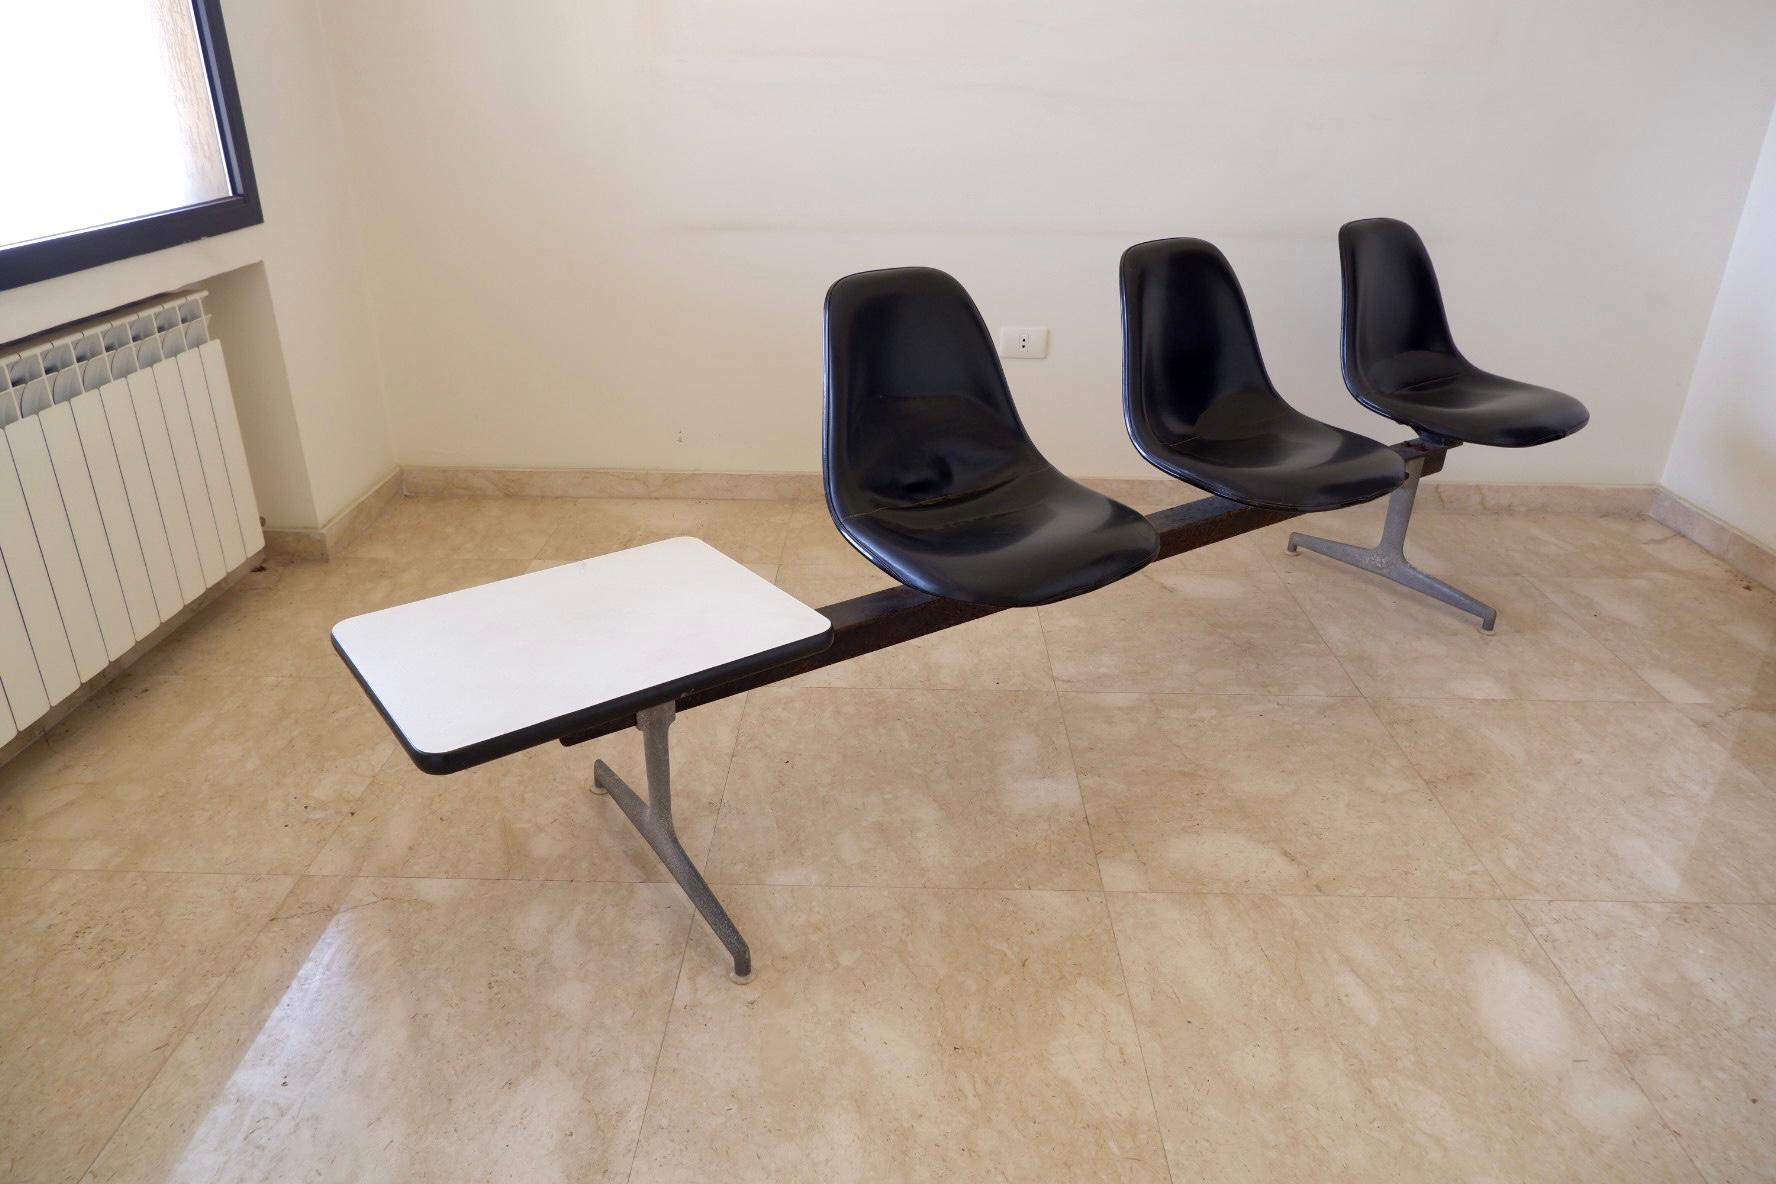 Iconic three-shell seating tandem by Charles & Ray Eames, black fiberglass shells on an aluminium base with a white side table attached, labeled on bottoms.